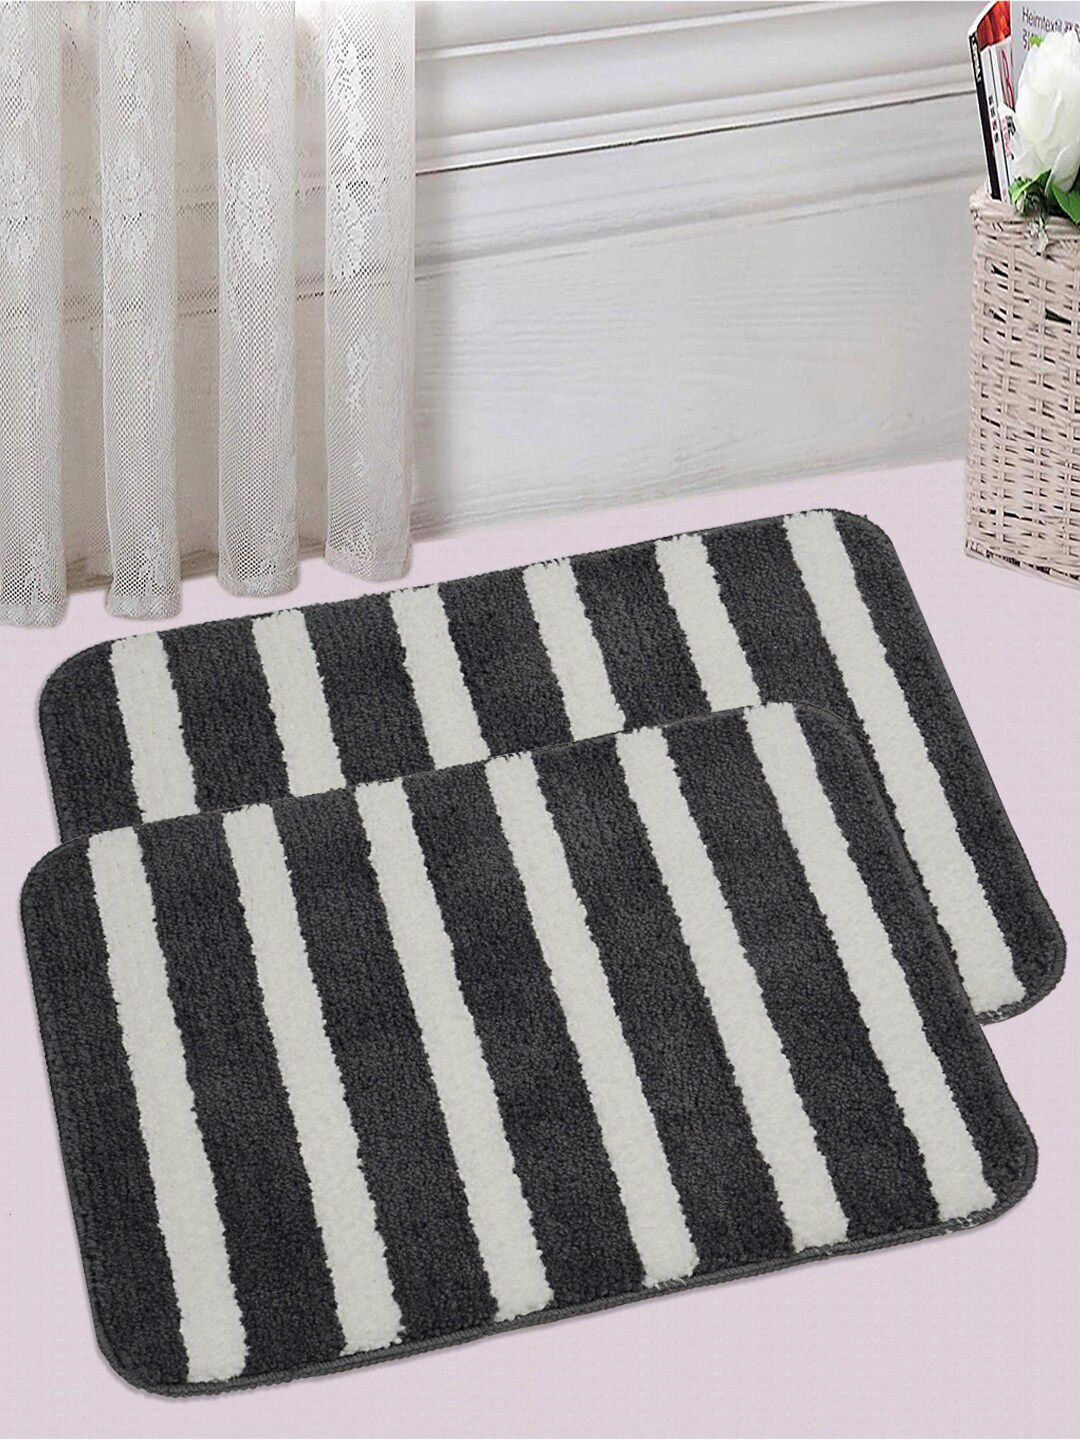 Saral Home Set Of 2 Grey & White Striped 833 GSM Microfiber Bath Mats Price in India